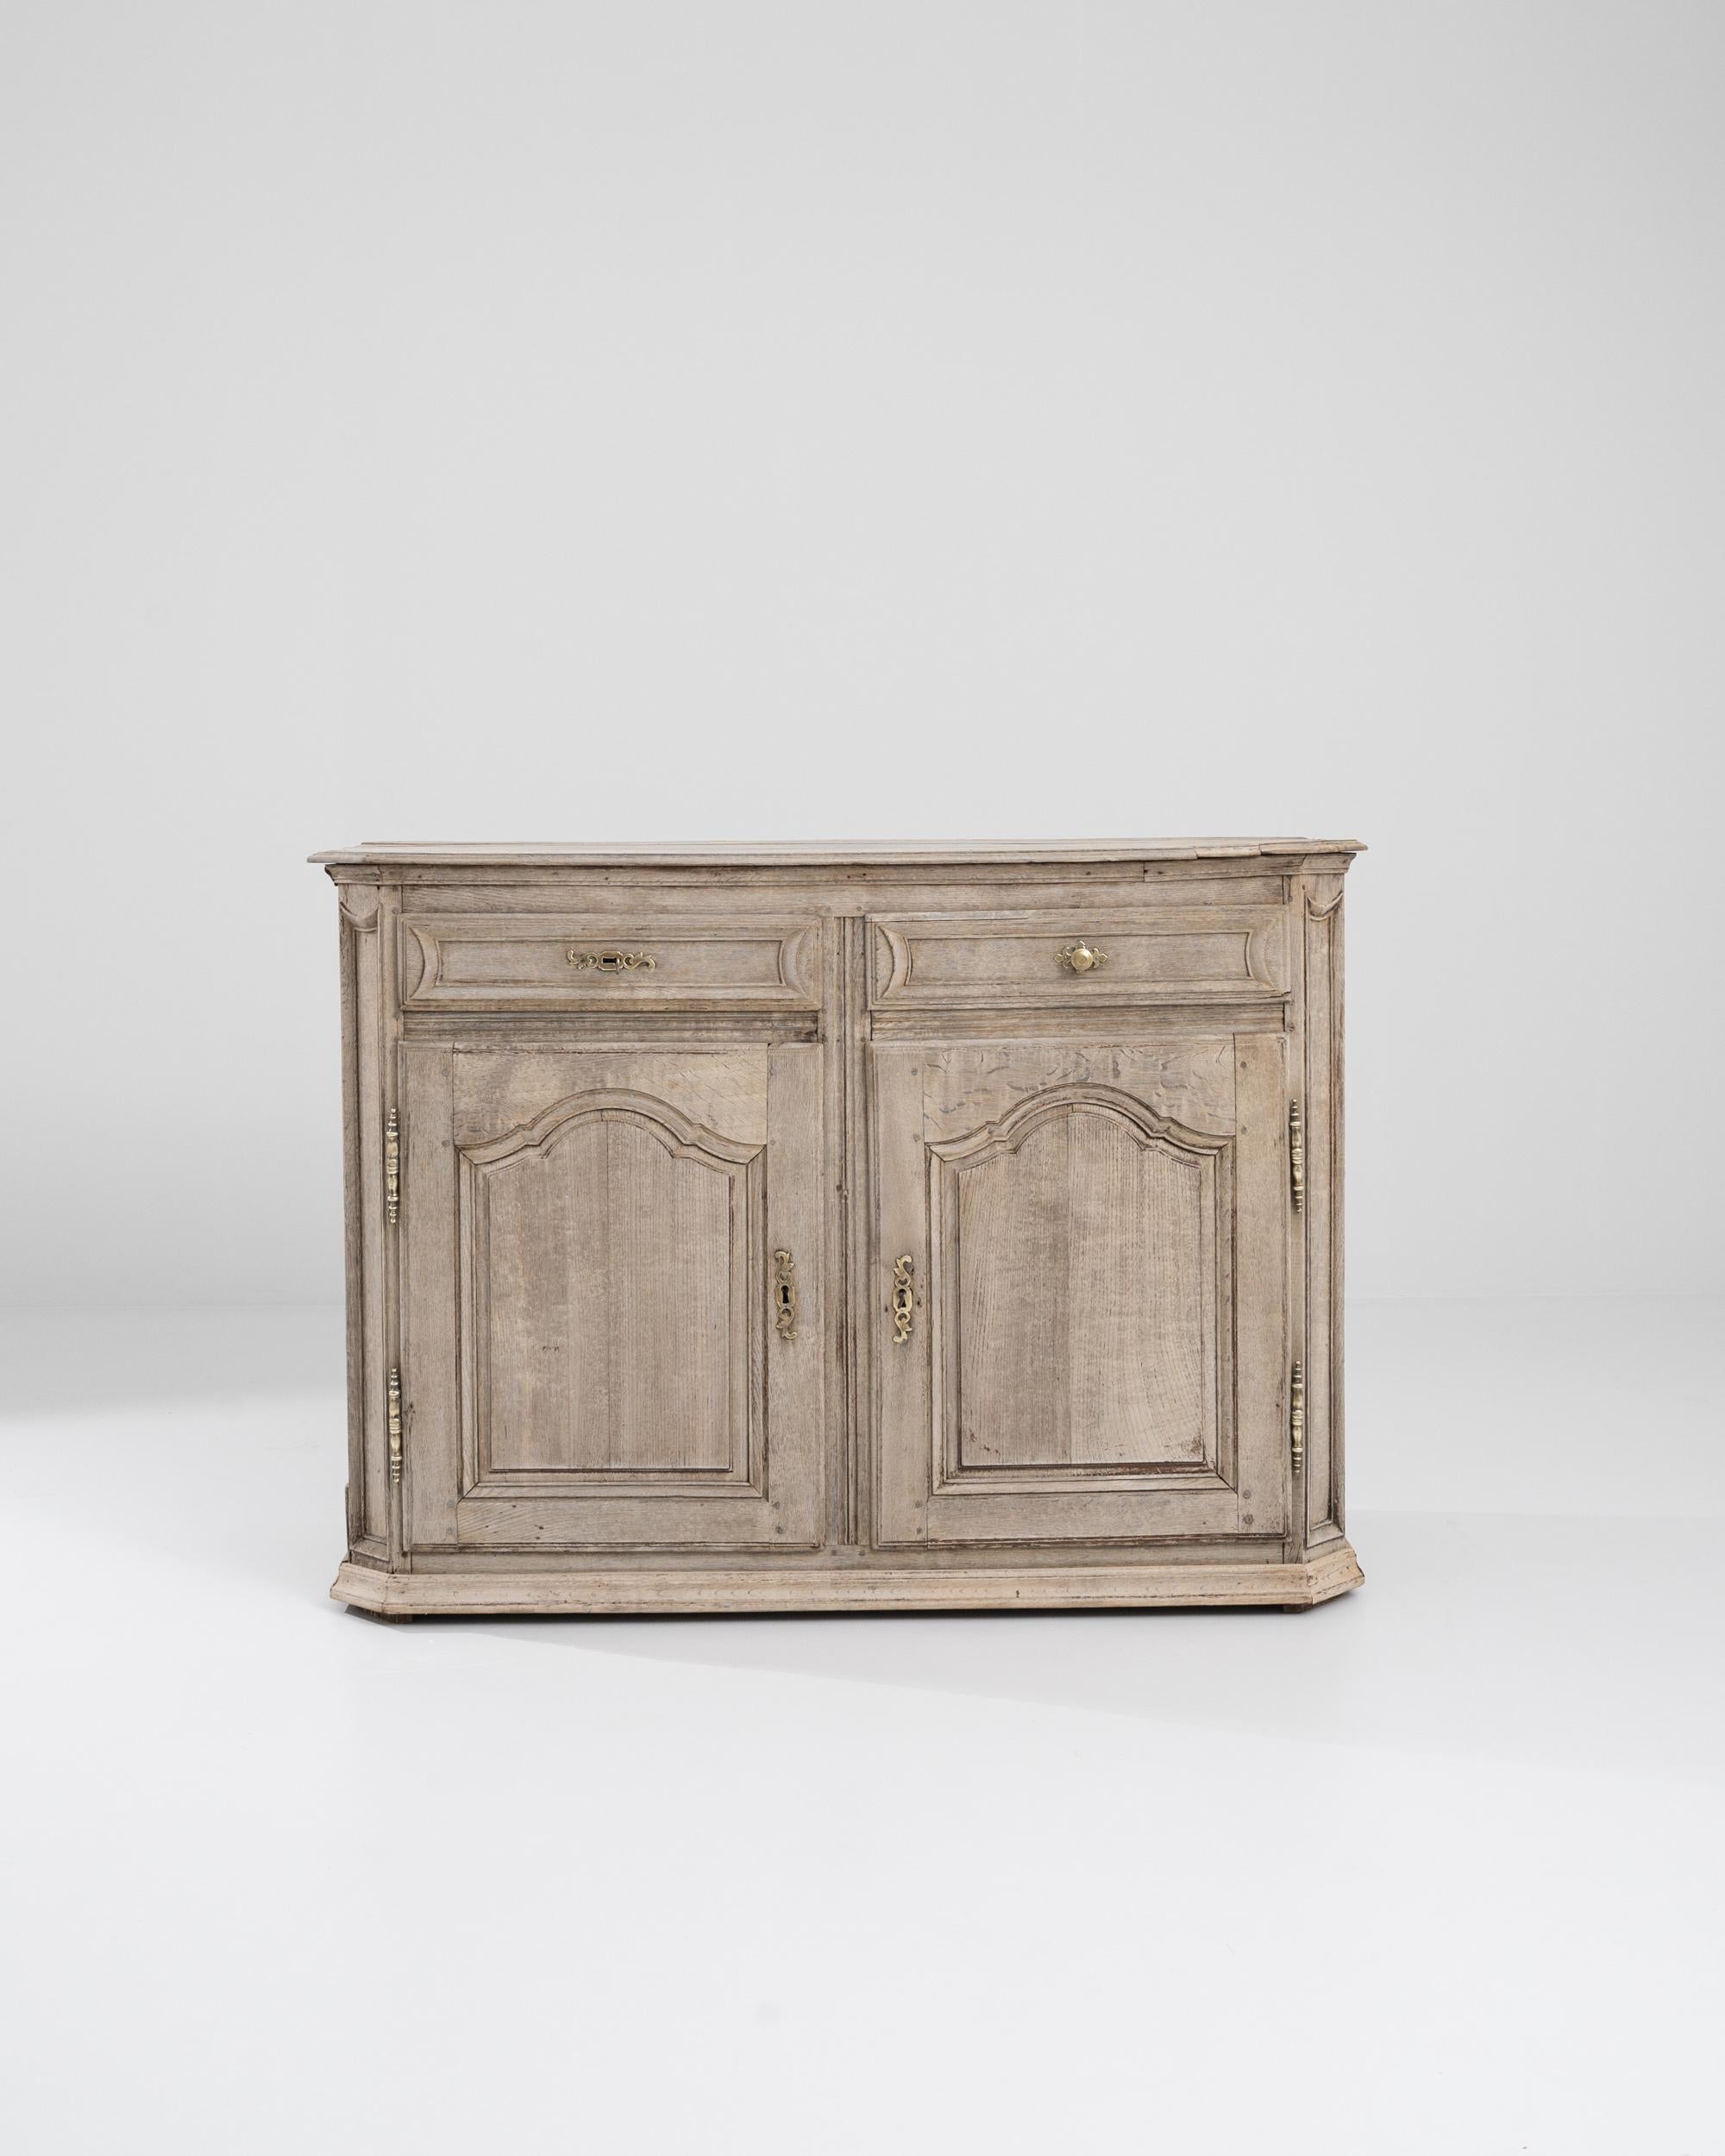 A French wooden buffet from the 19th Century. Sumptuously hand carved paneling details the two upper drawers and two large storage compartments that comprise this bleached oak buffet. A pleasing patina has spread across the surface of this buffet as